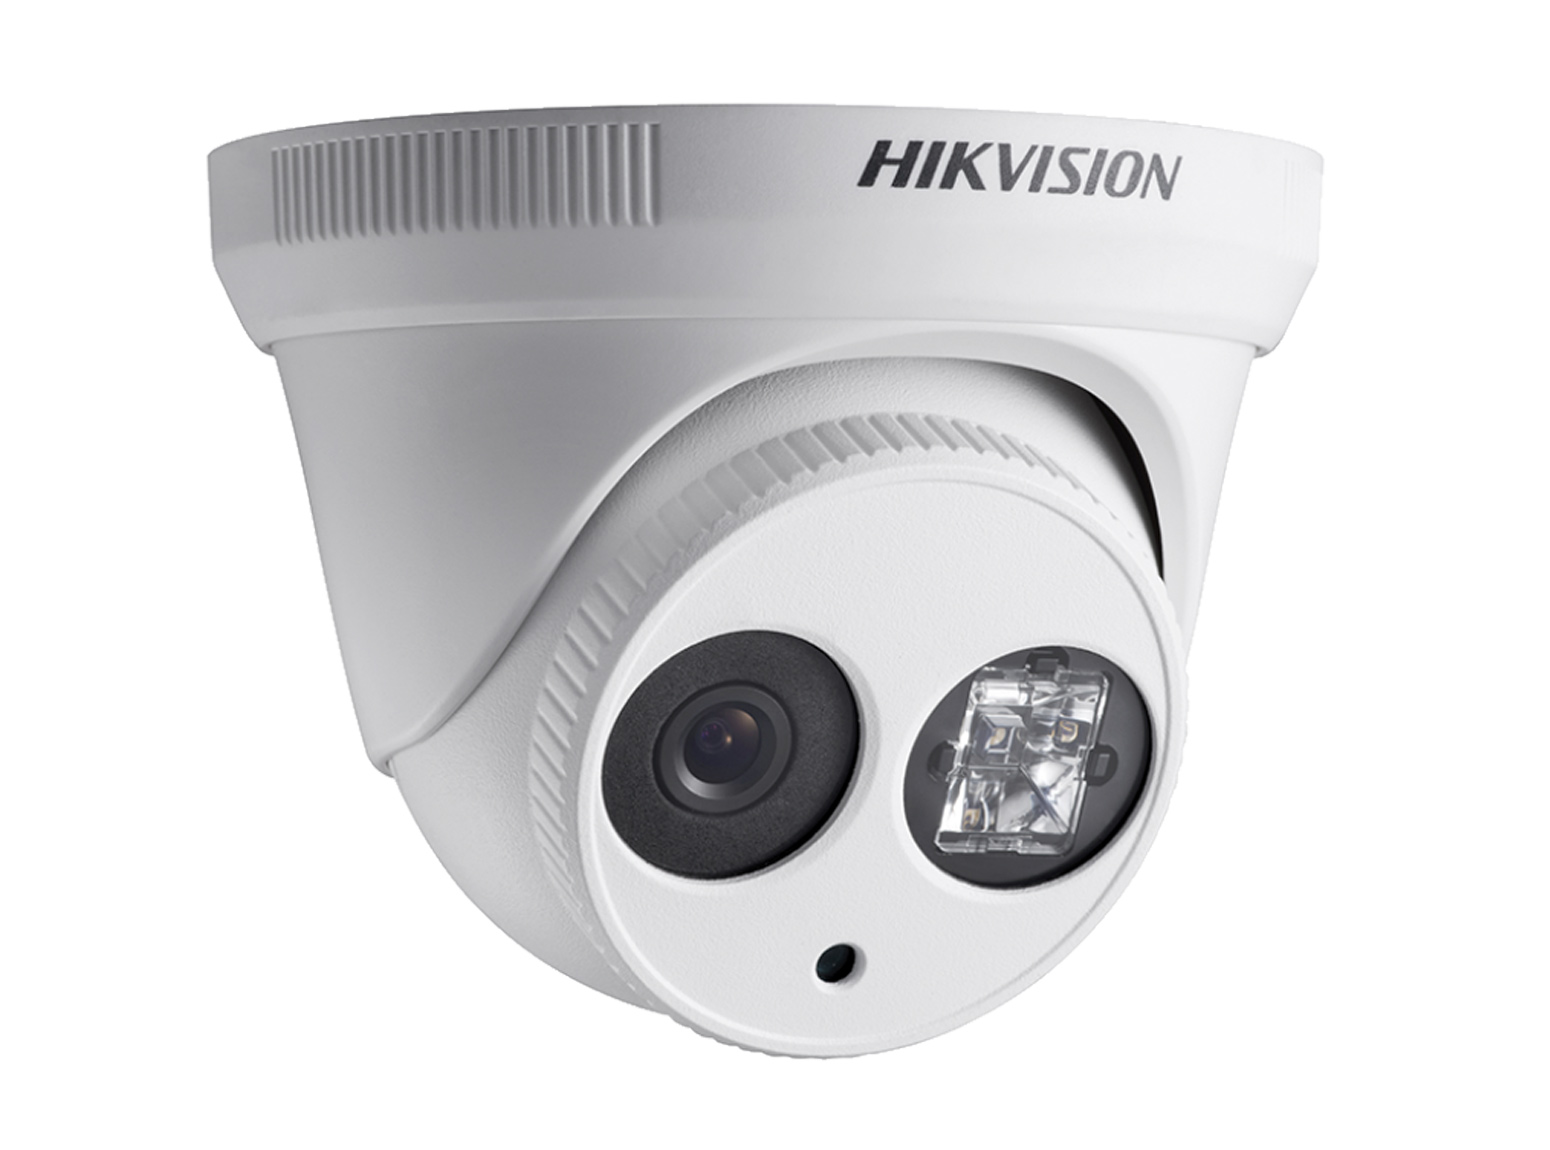 DS-2CD2312-I Hikvision Discontinued Product - CCTV Malaysia Distributor ...